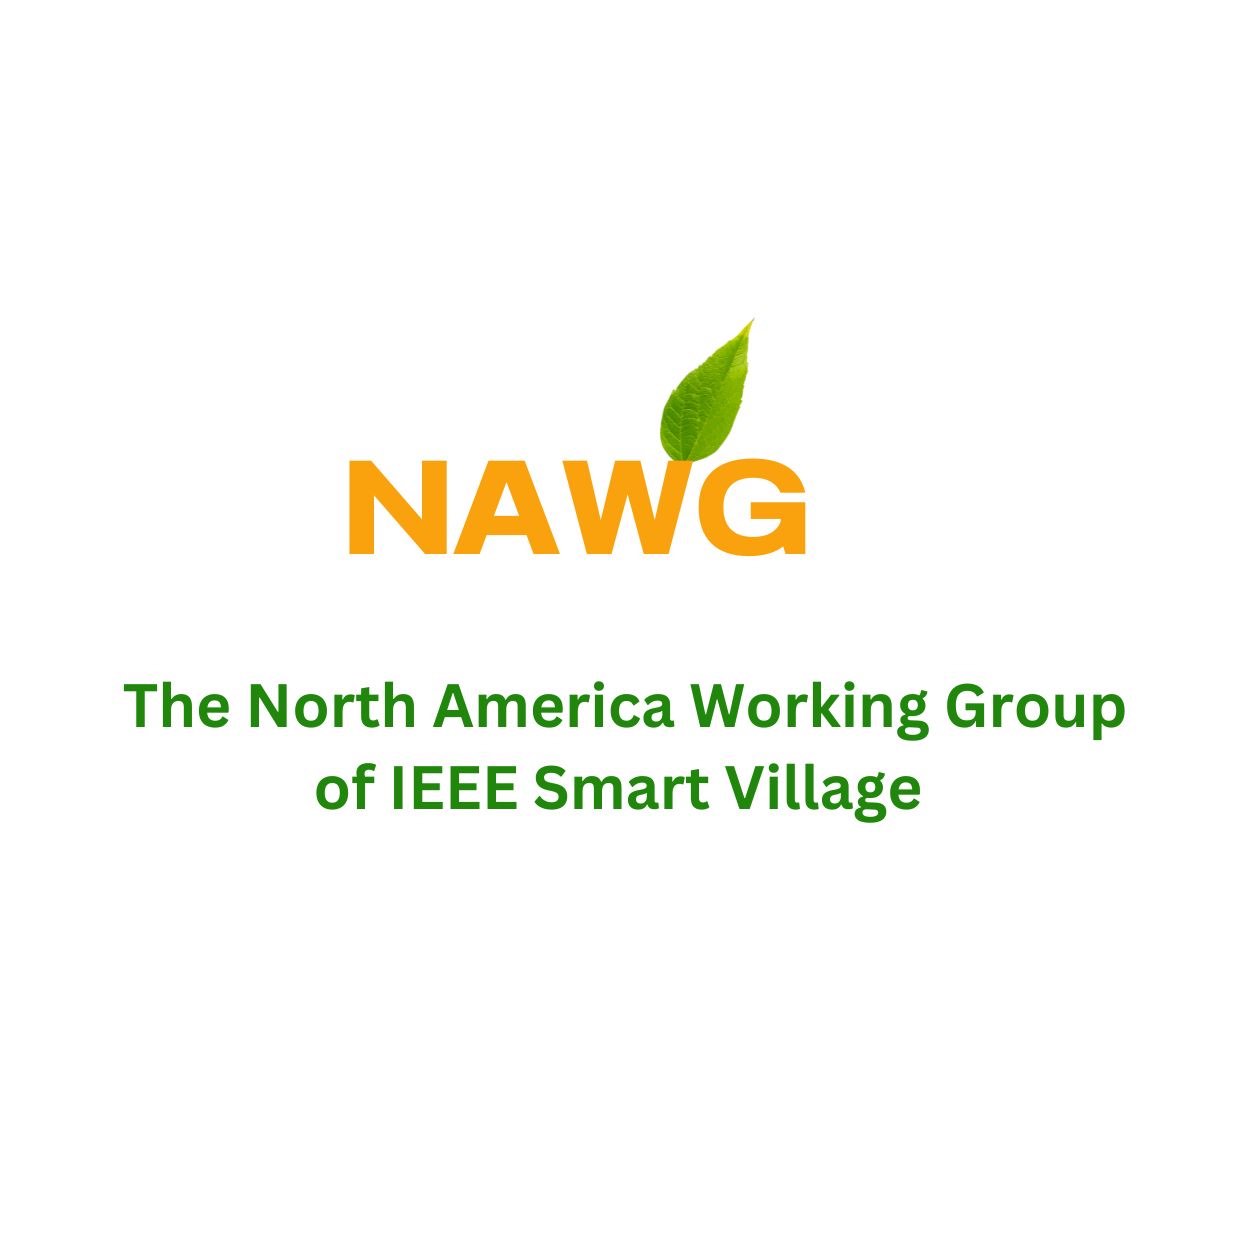 The North America Working Group of IEEE Smart Village (NAWG) logo.